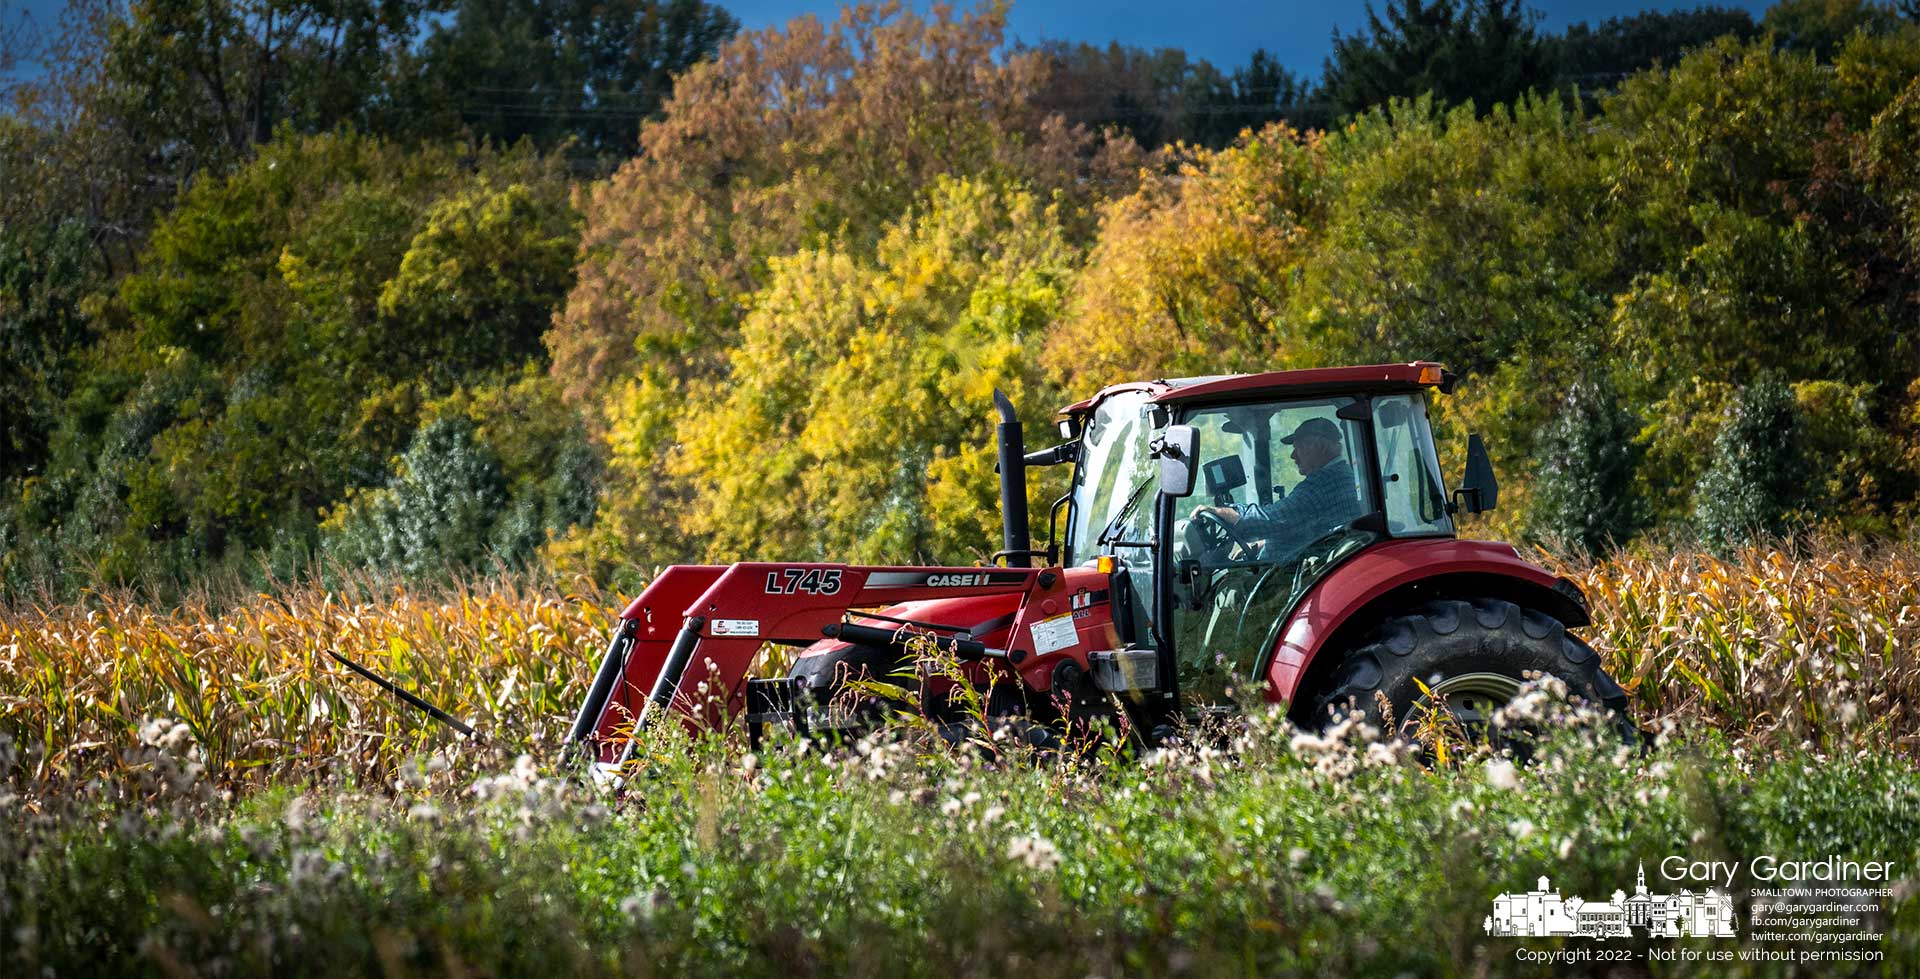 Farmer Kevins Scott mows weeds and overgrown grass in one of the fields at the Braun Farm clearing it for parking for a future Otterbein event. My Final Photo for Oct. 7, 2022.